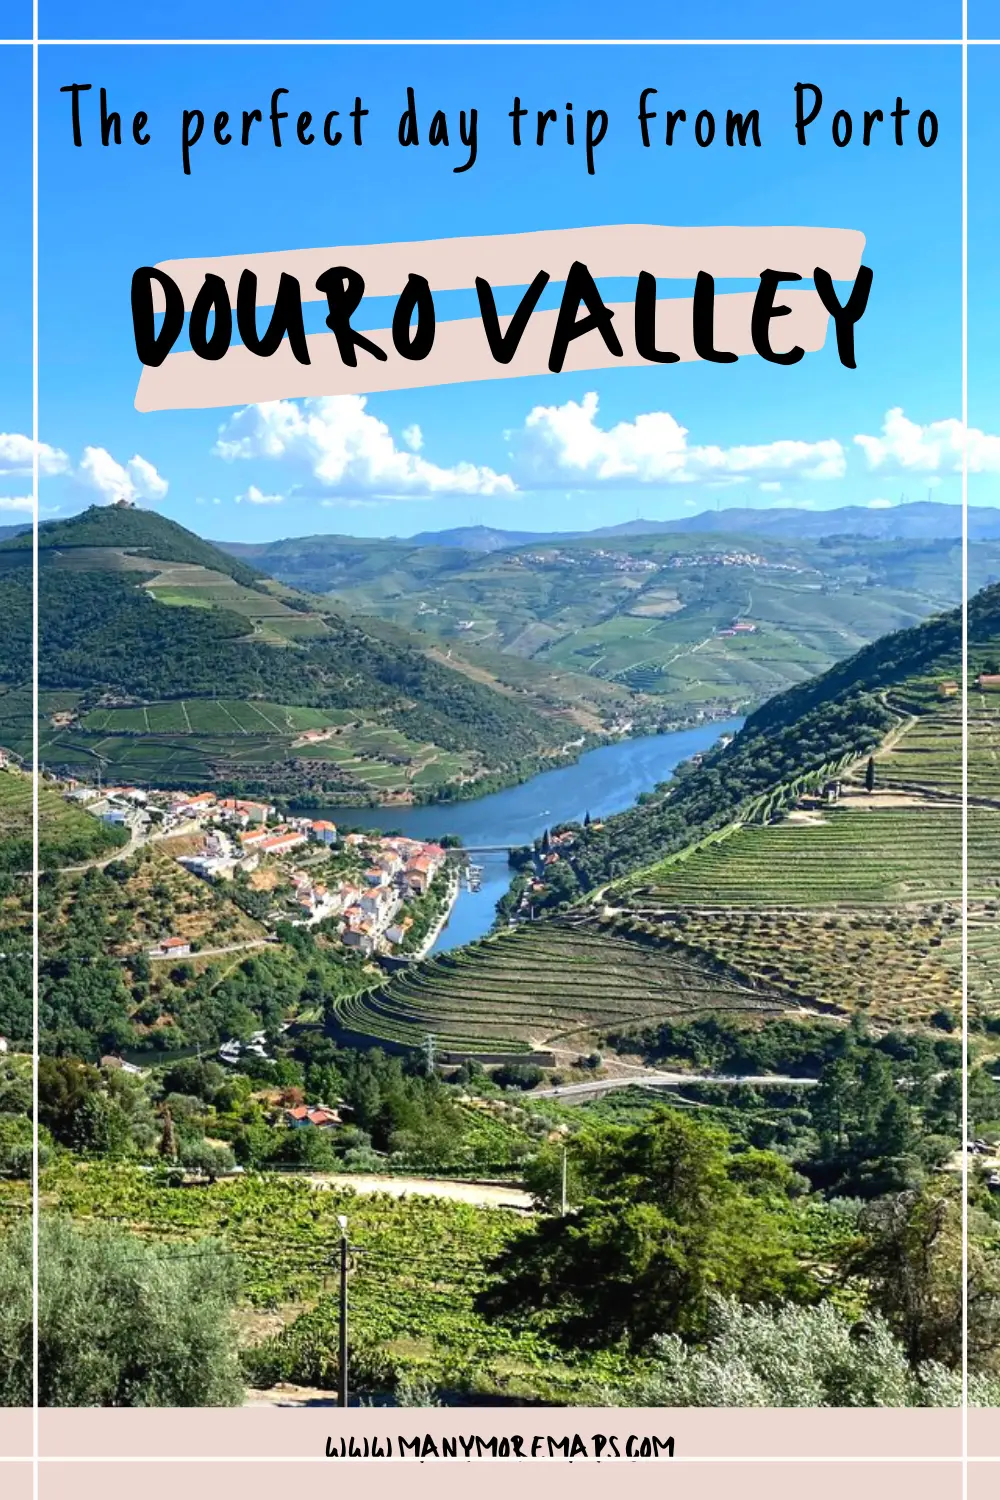 The Douro Valley is one of the world's most famous wine regions, and it's an easy day trip from the city of Porto, Portugal! In this travel guide I'll share everything you need to know about travel to the Douro Valley, including where to go wine tasting, the best things to do, and how to get there.